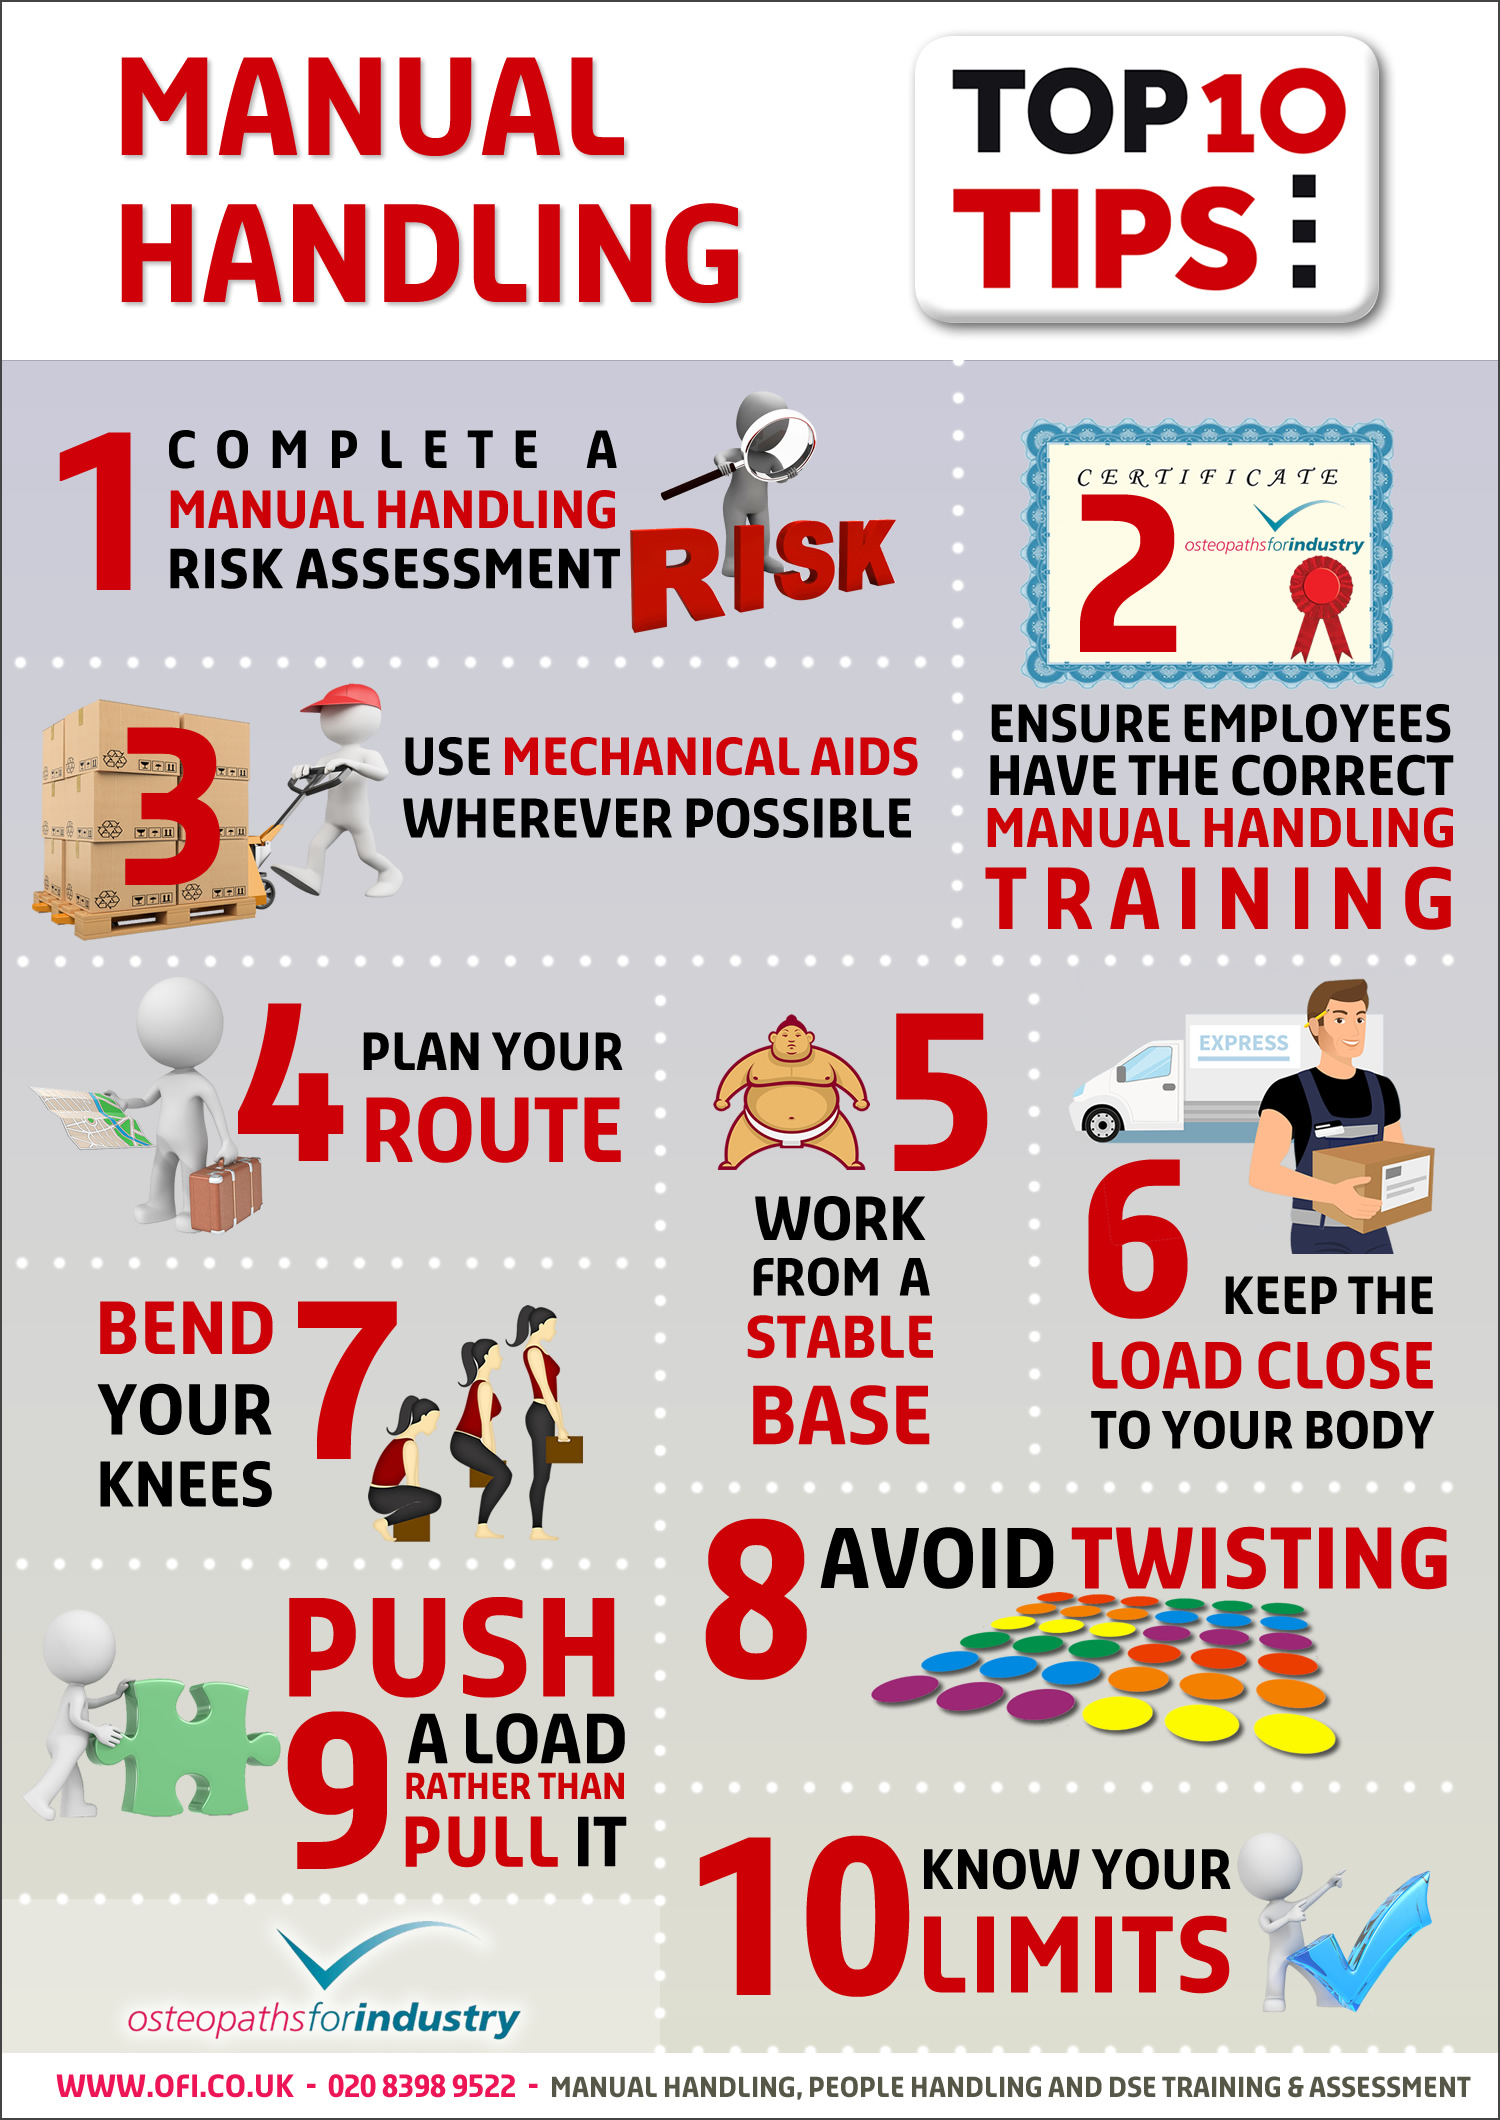 Manual Handling Top 10 Tips Infographic